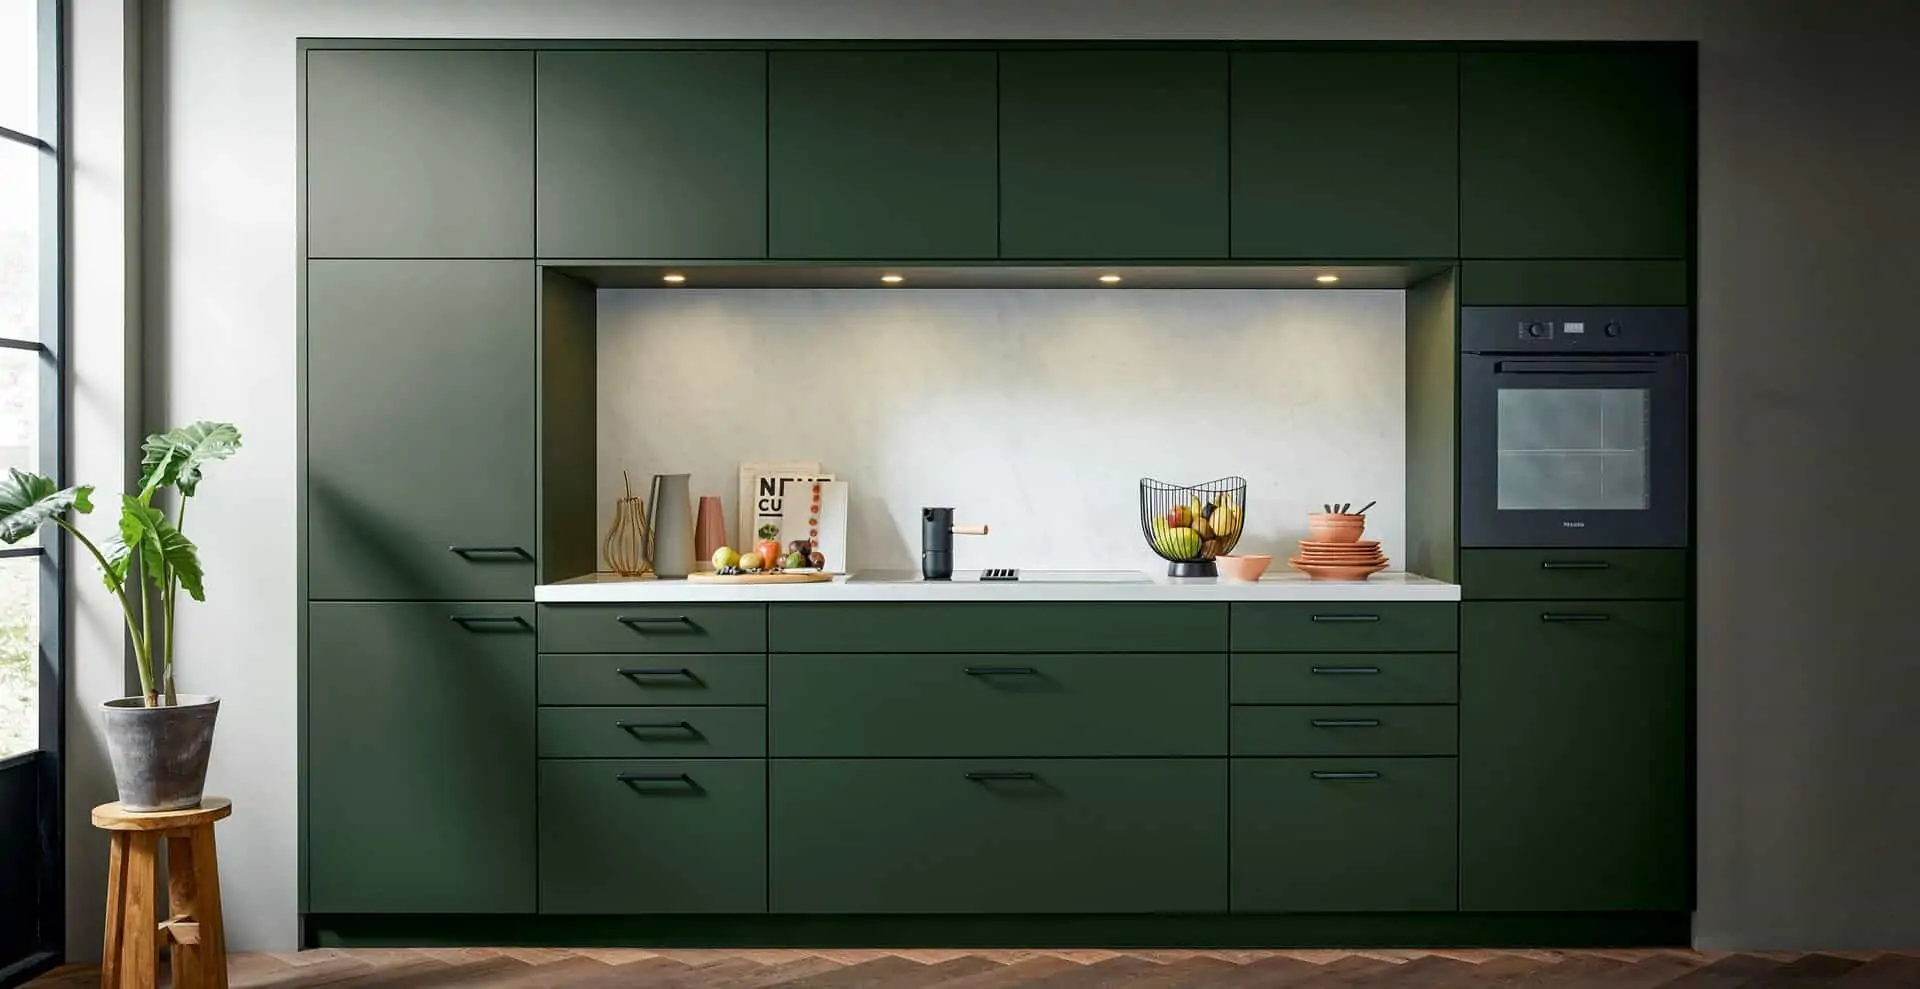 green designer kitchen colour with island, cabinets, and cupboard